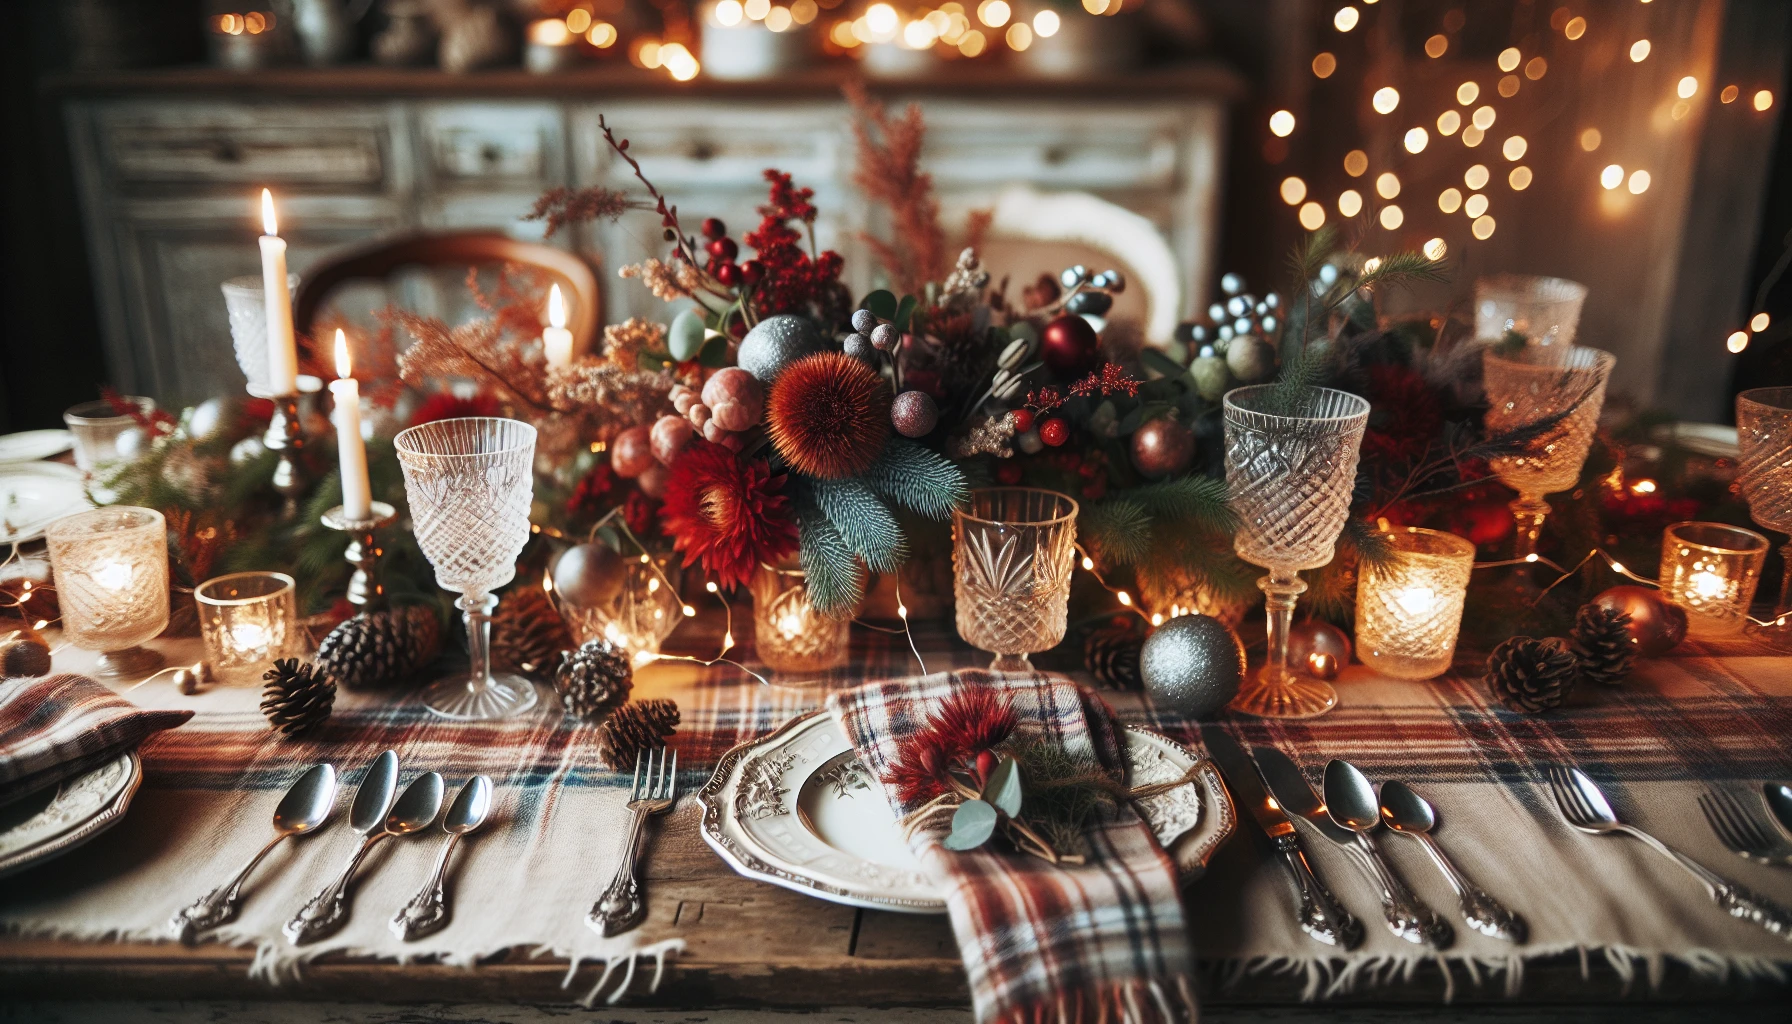 Elegant table settings with winter-inspired decor and warm textures